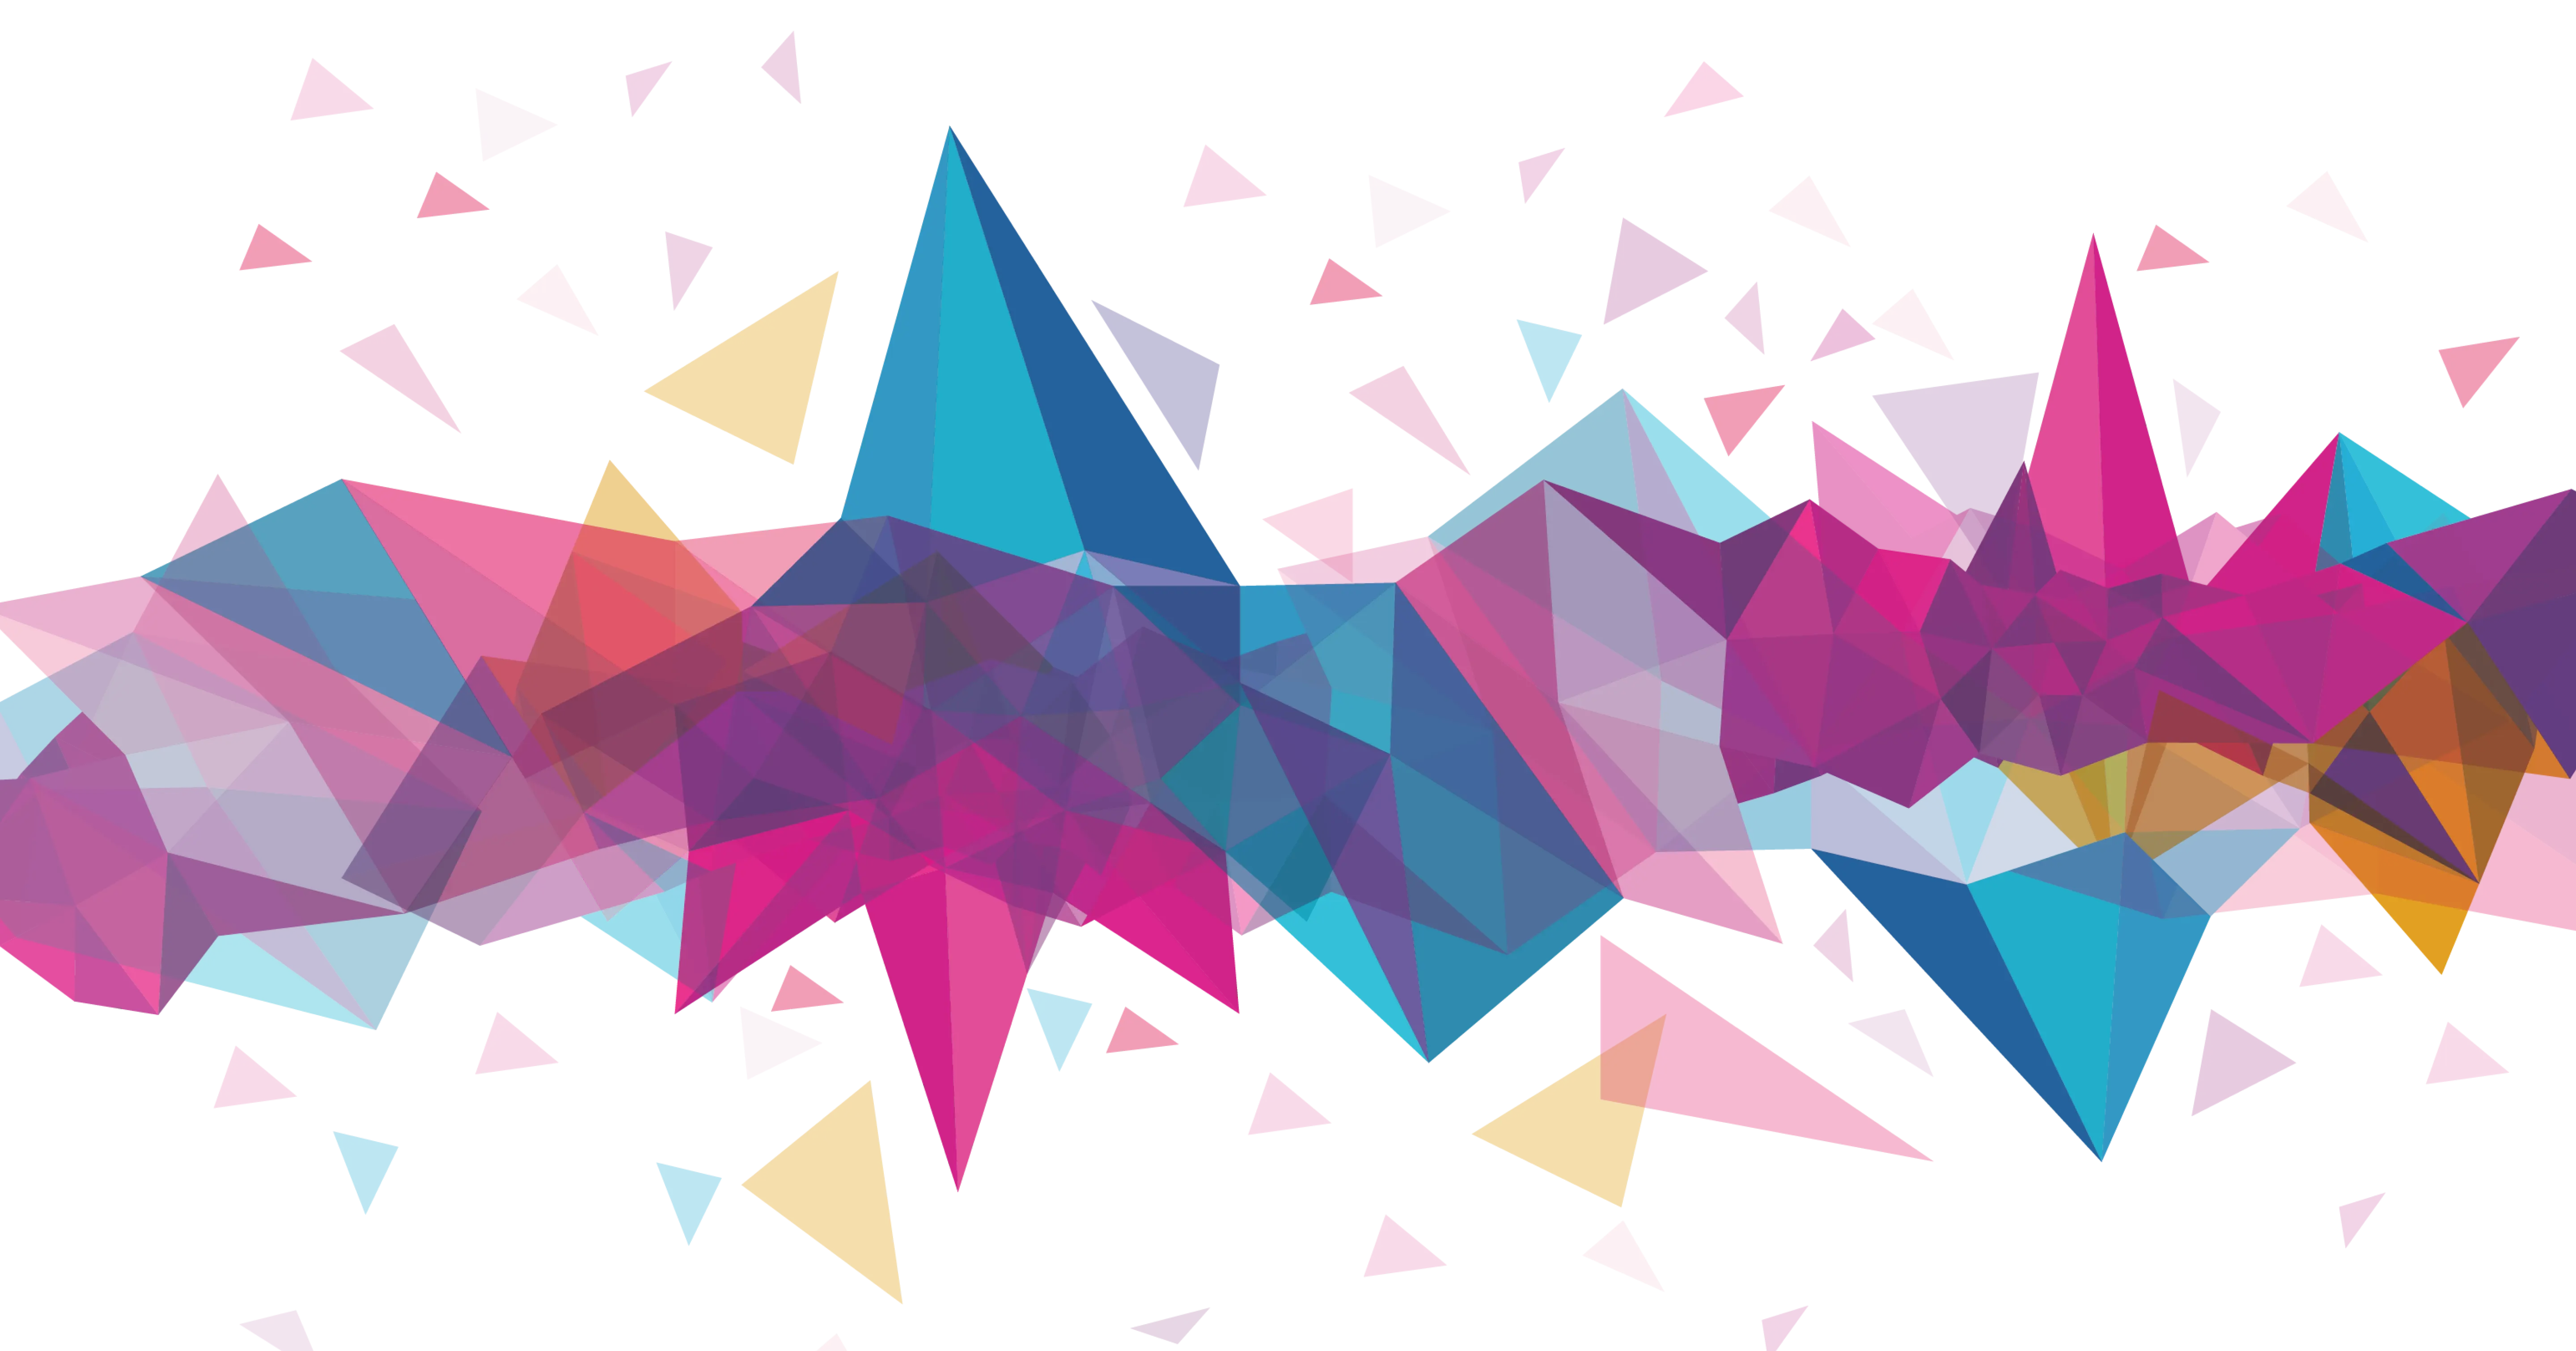 colorful shapes